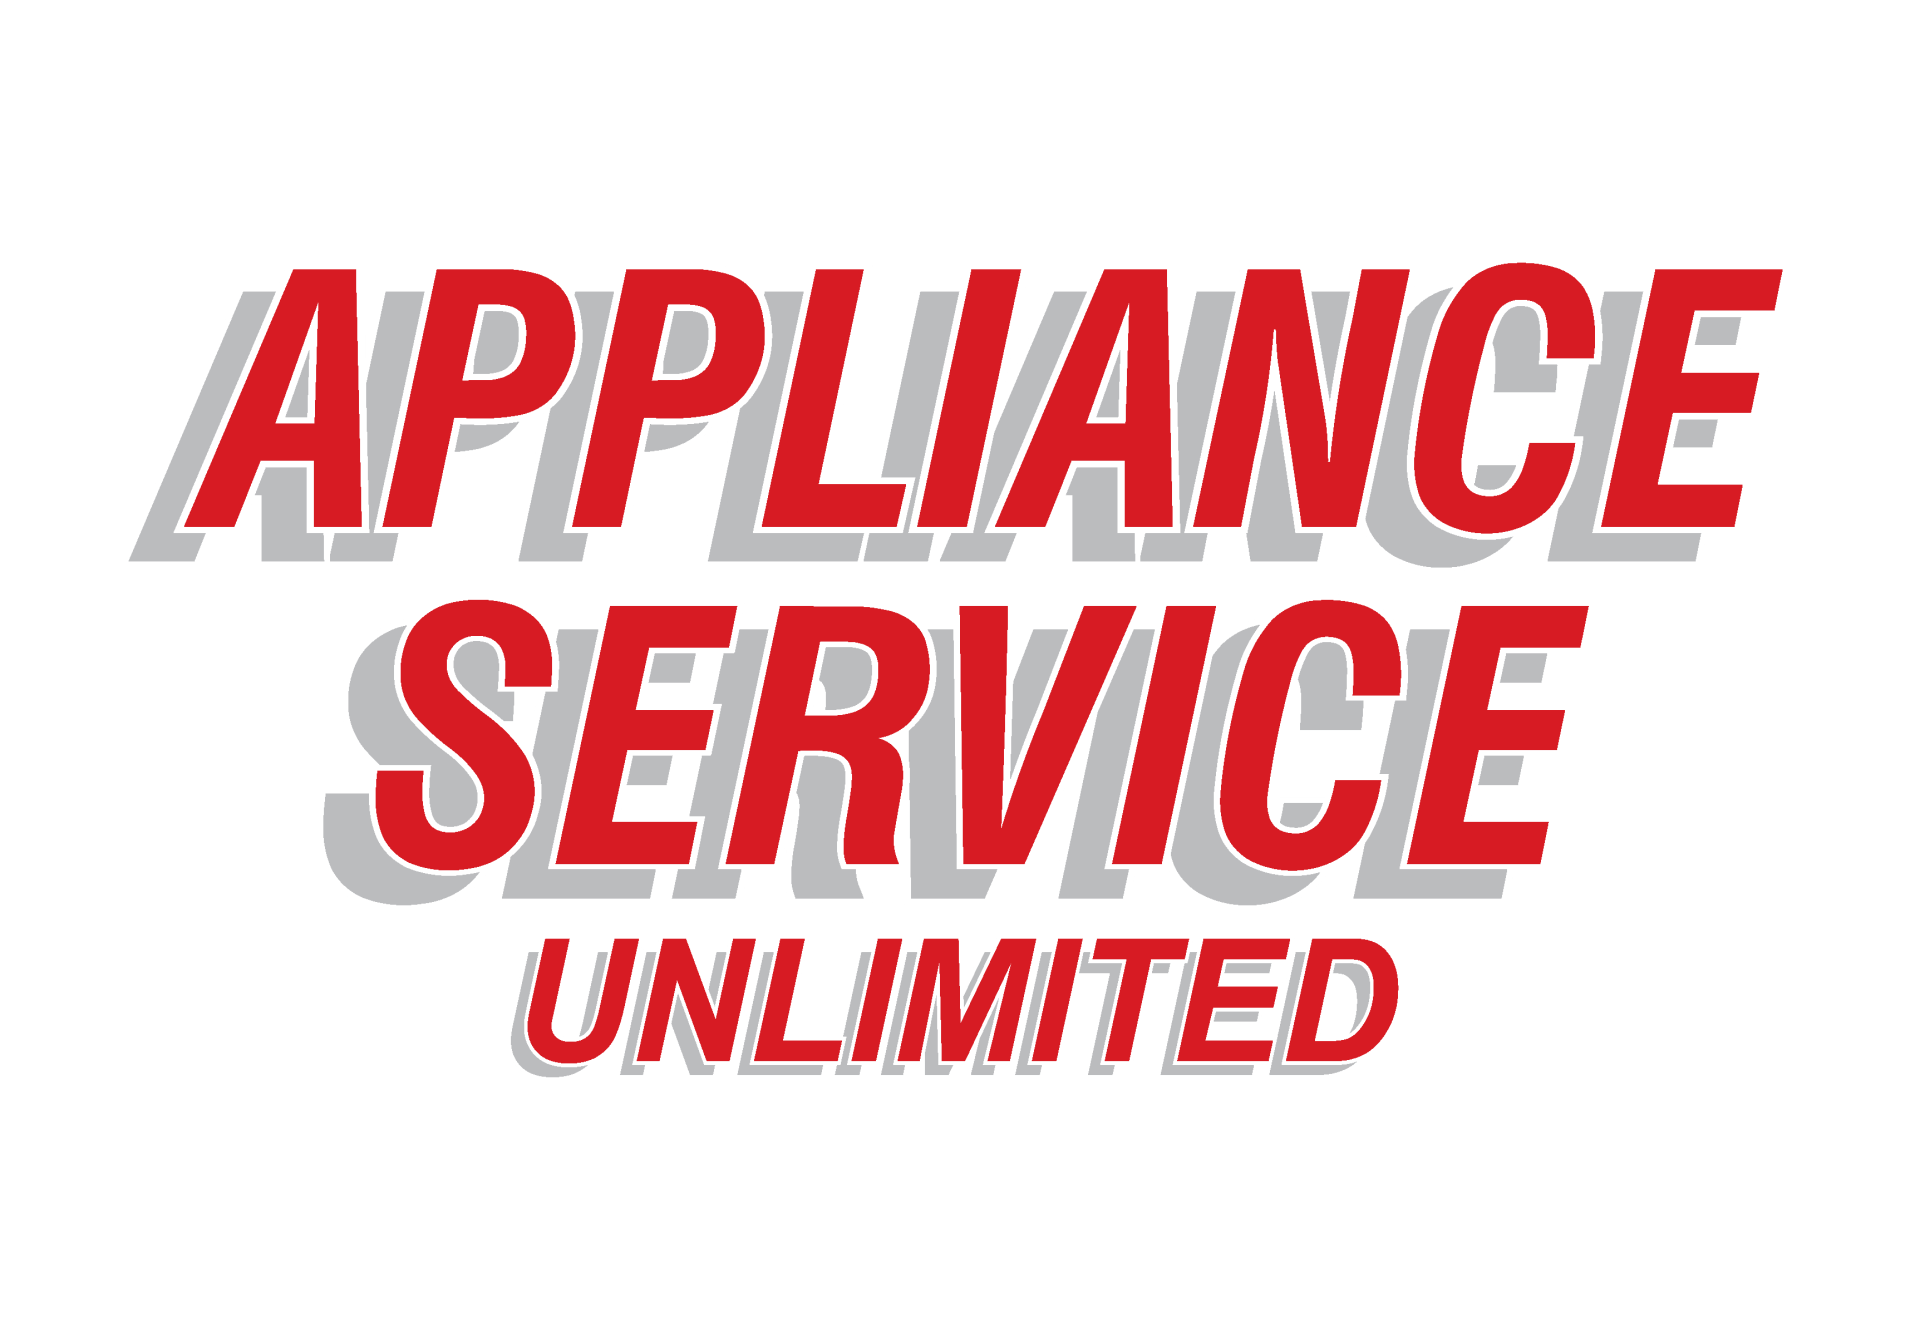 Appliance Service Unlimited Of Middleton, Inc